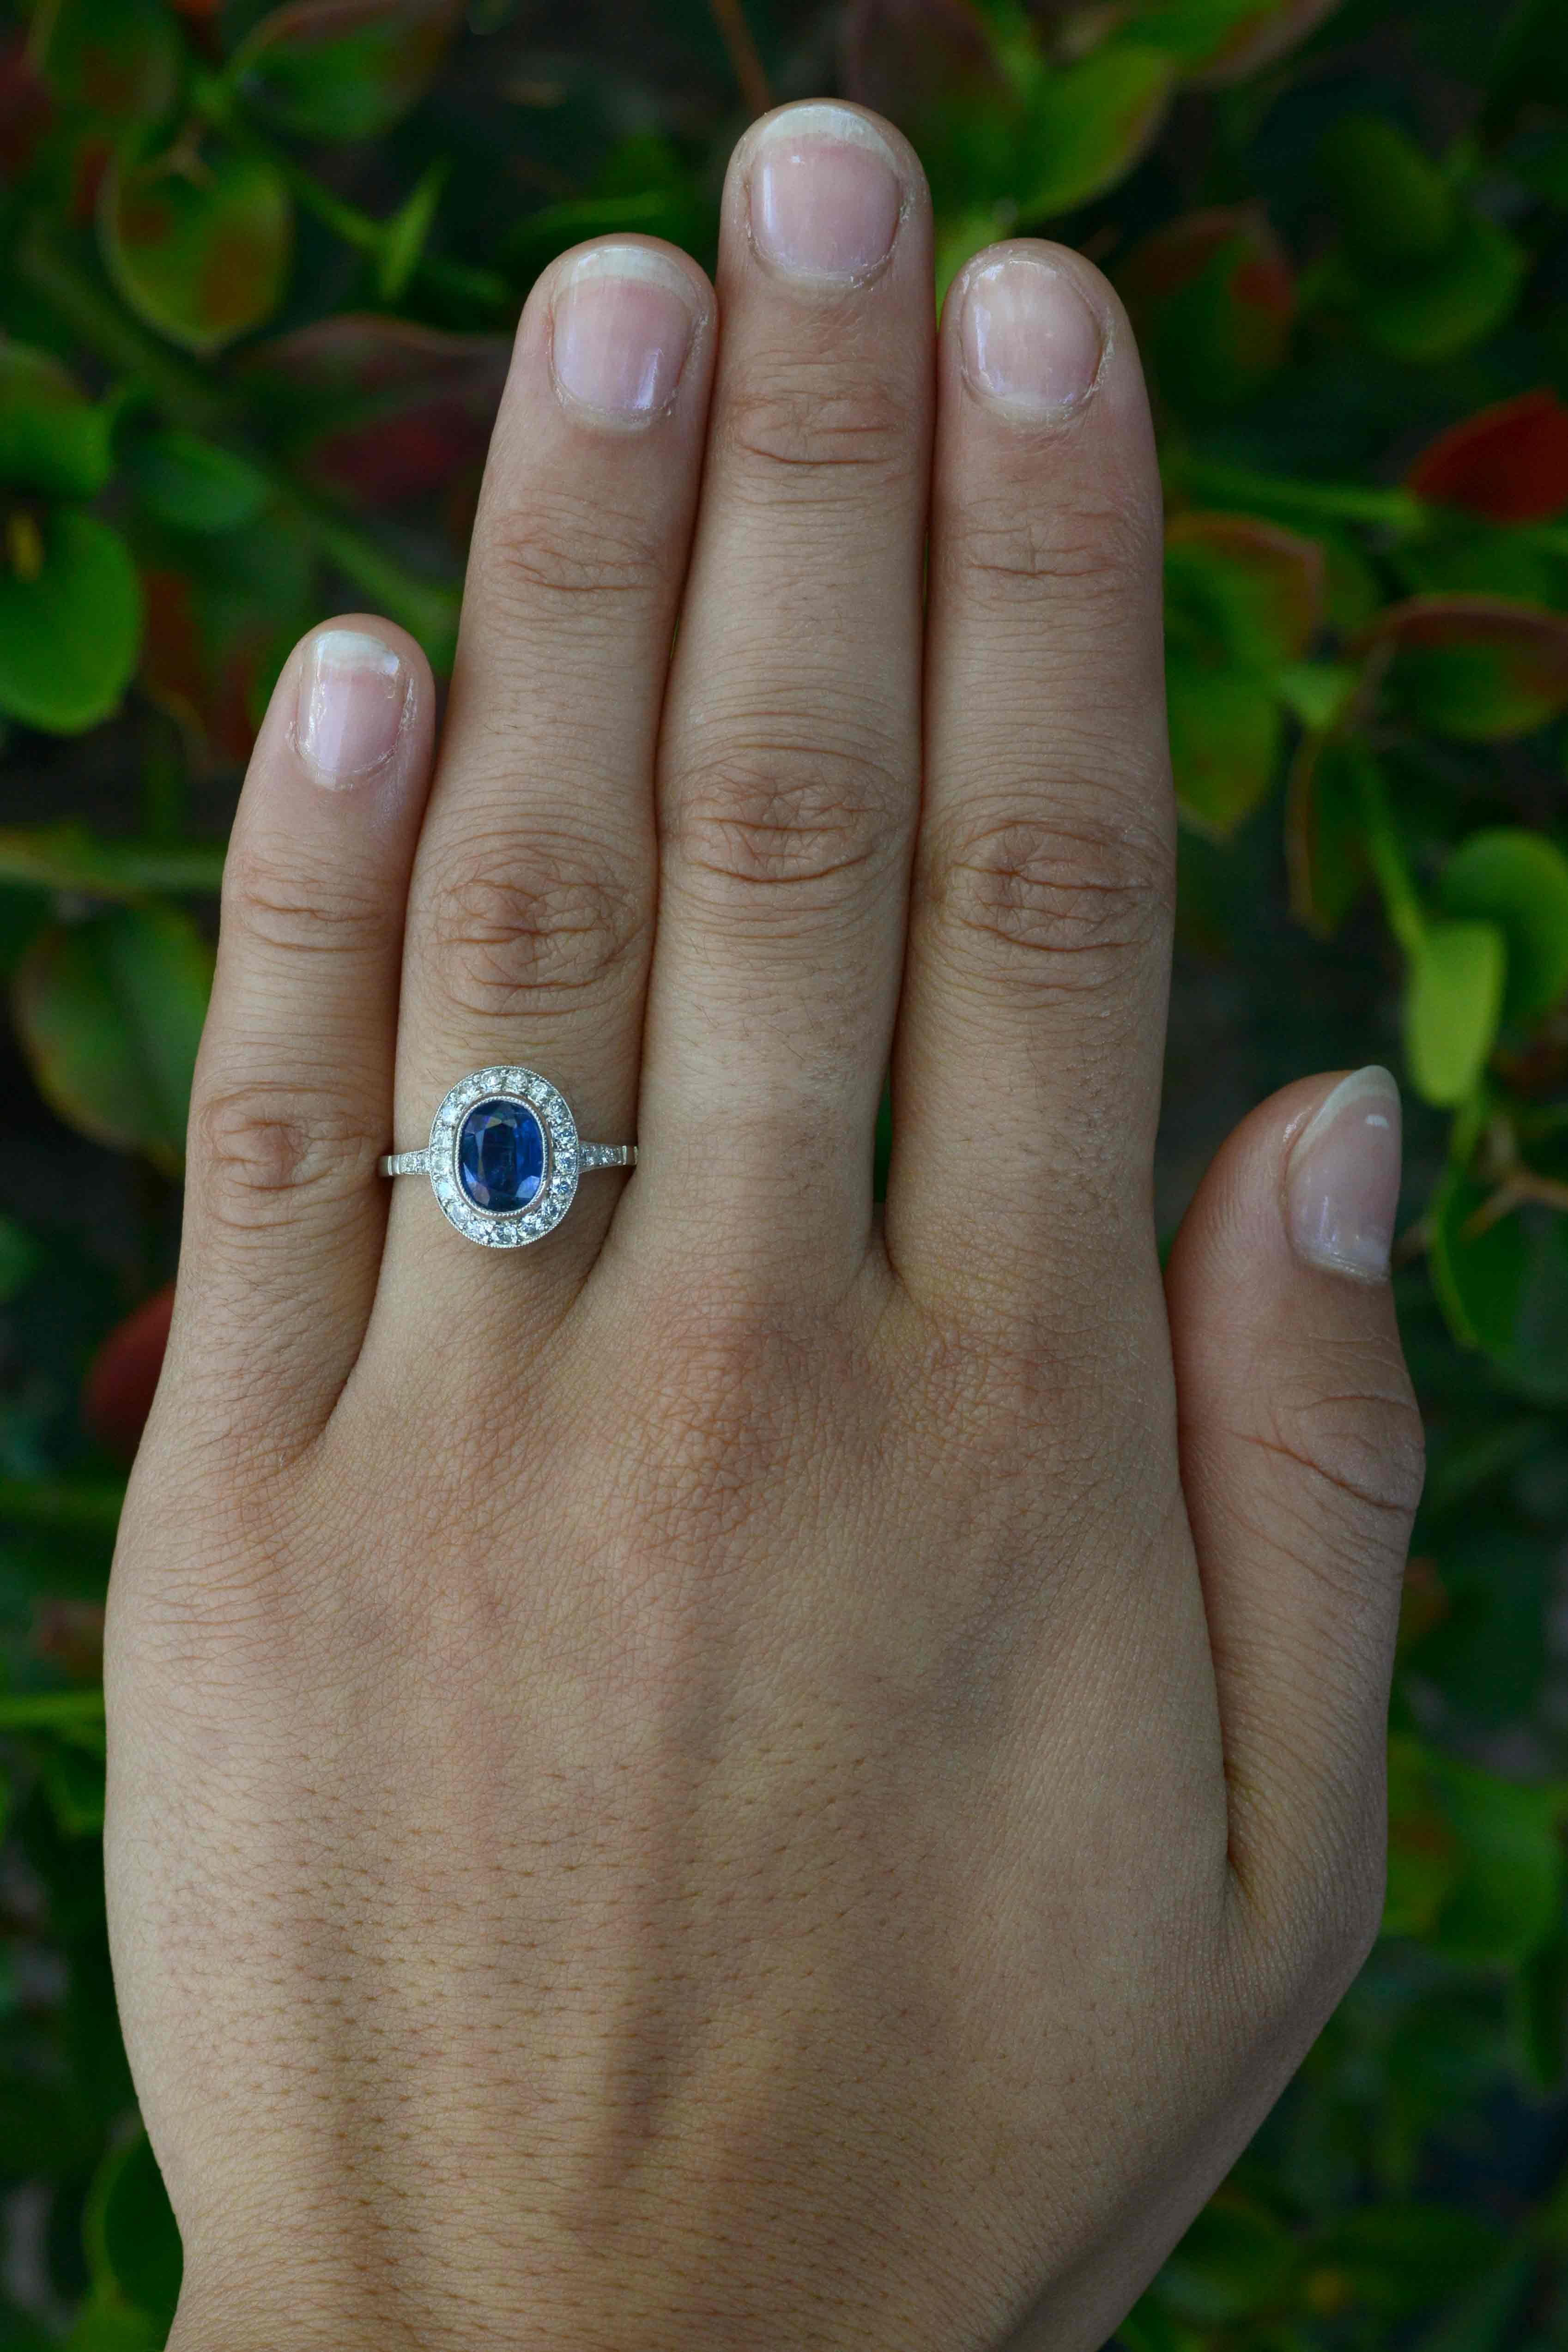 A revivalist Edwardian sapphire engagement ring adorned with a sparkling diamond halo. The finger coverage on this unusual, elongated oval ring is breathtaking. Weighing an impressive 1.87 carats, the captivating natural sapphire of a vivid,